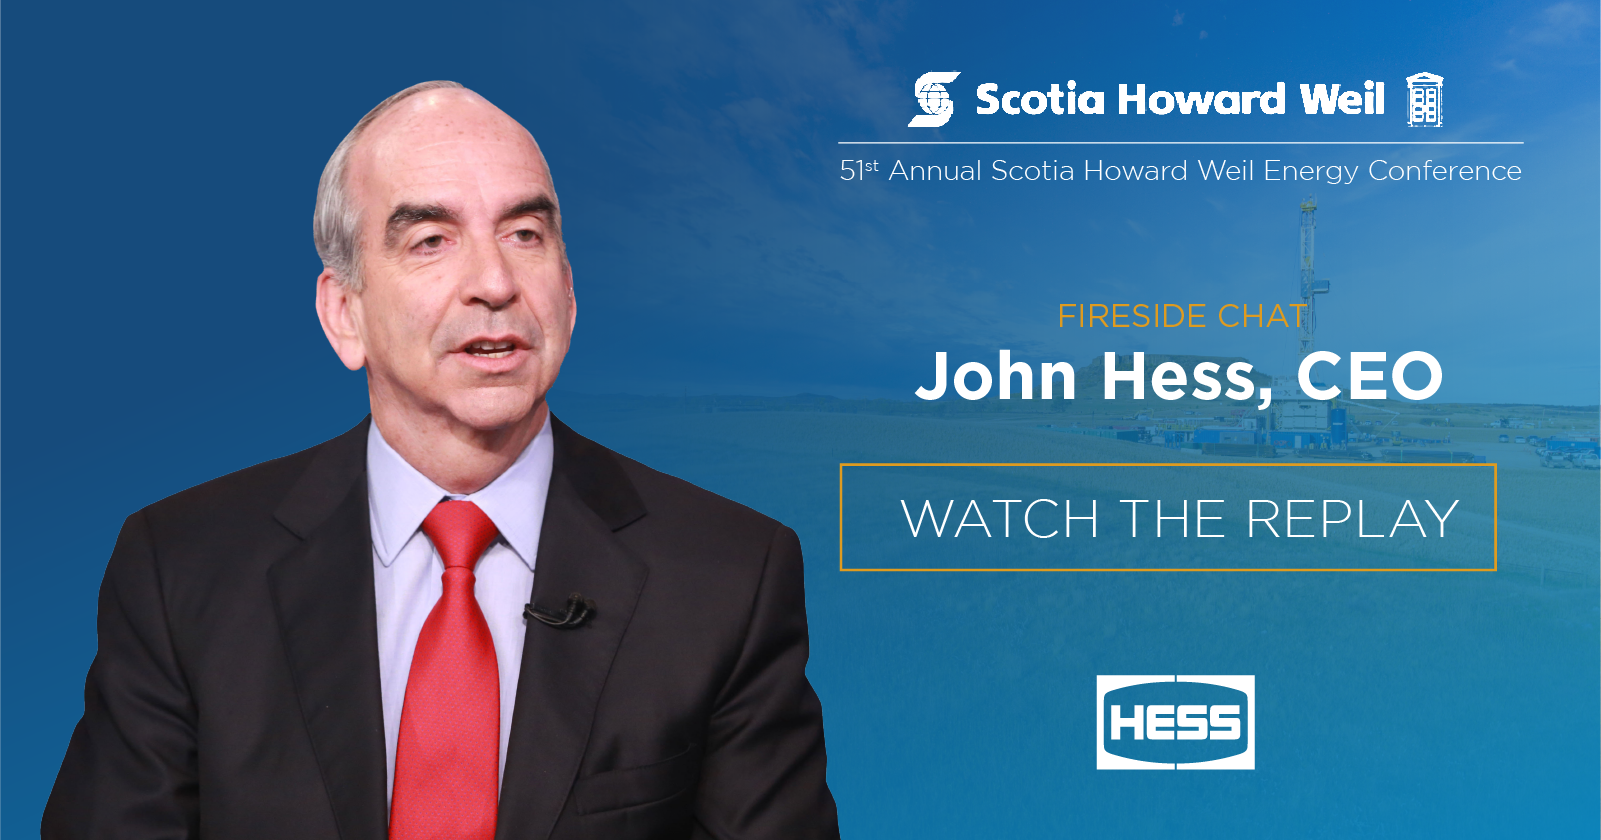 CEO John Hess Presents at 51st Annual Scotia Howard Weil Energy Conference